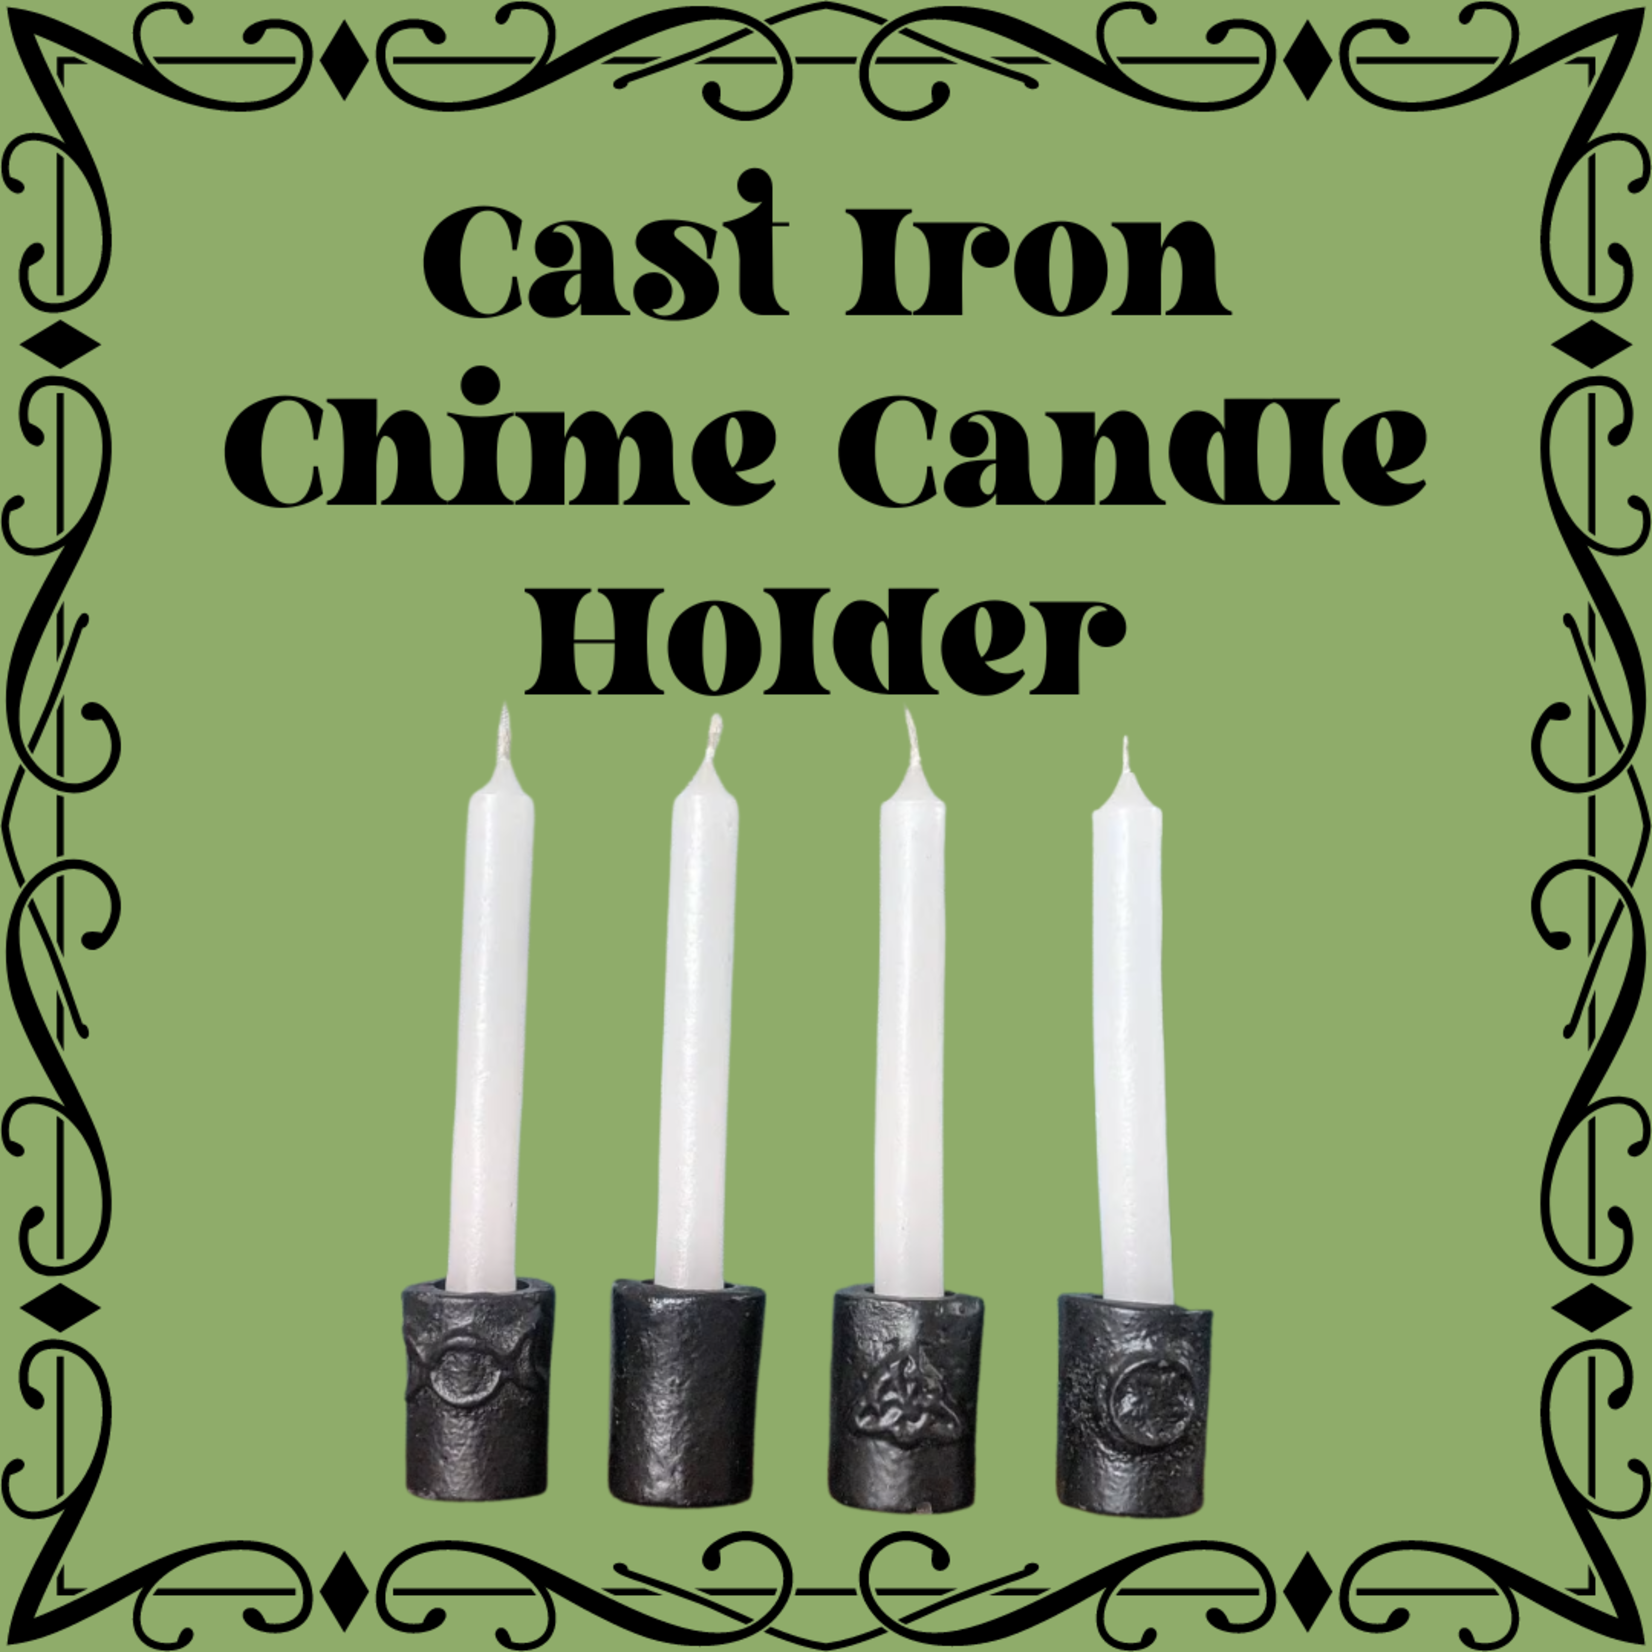 Chime Candle Holder (1 Candle Included)